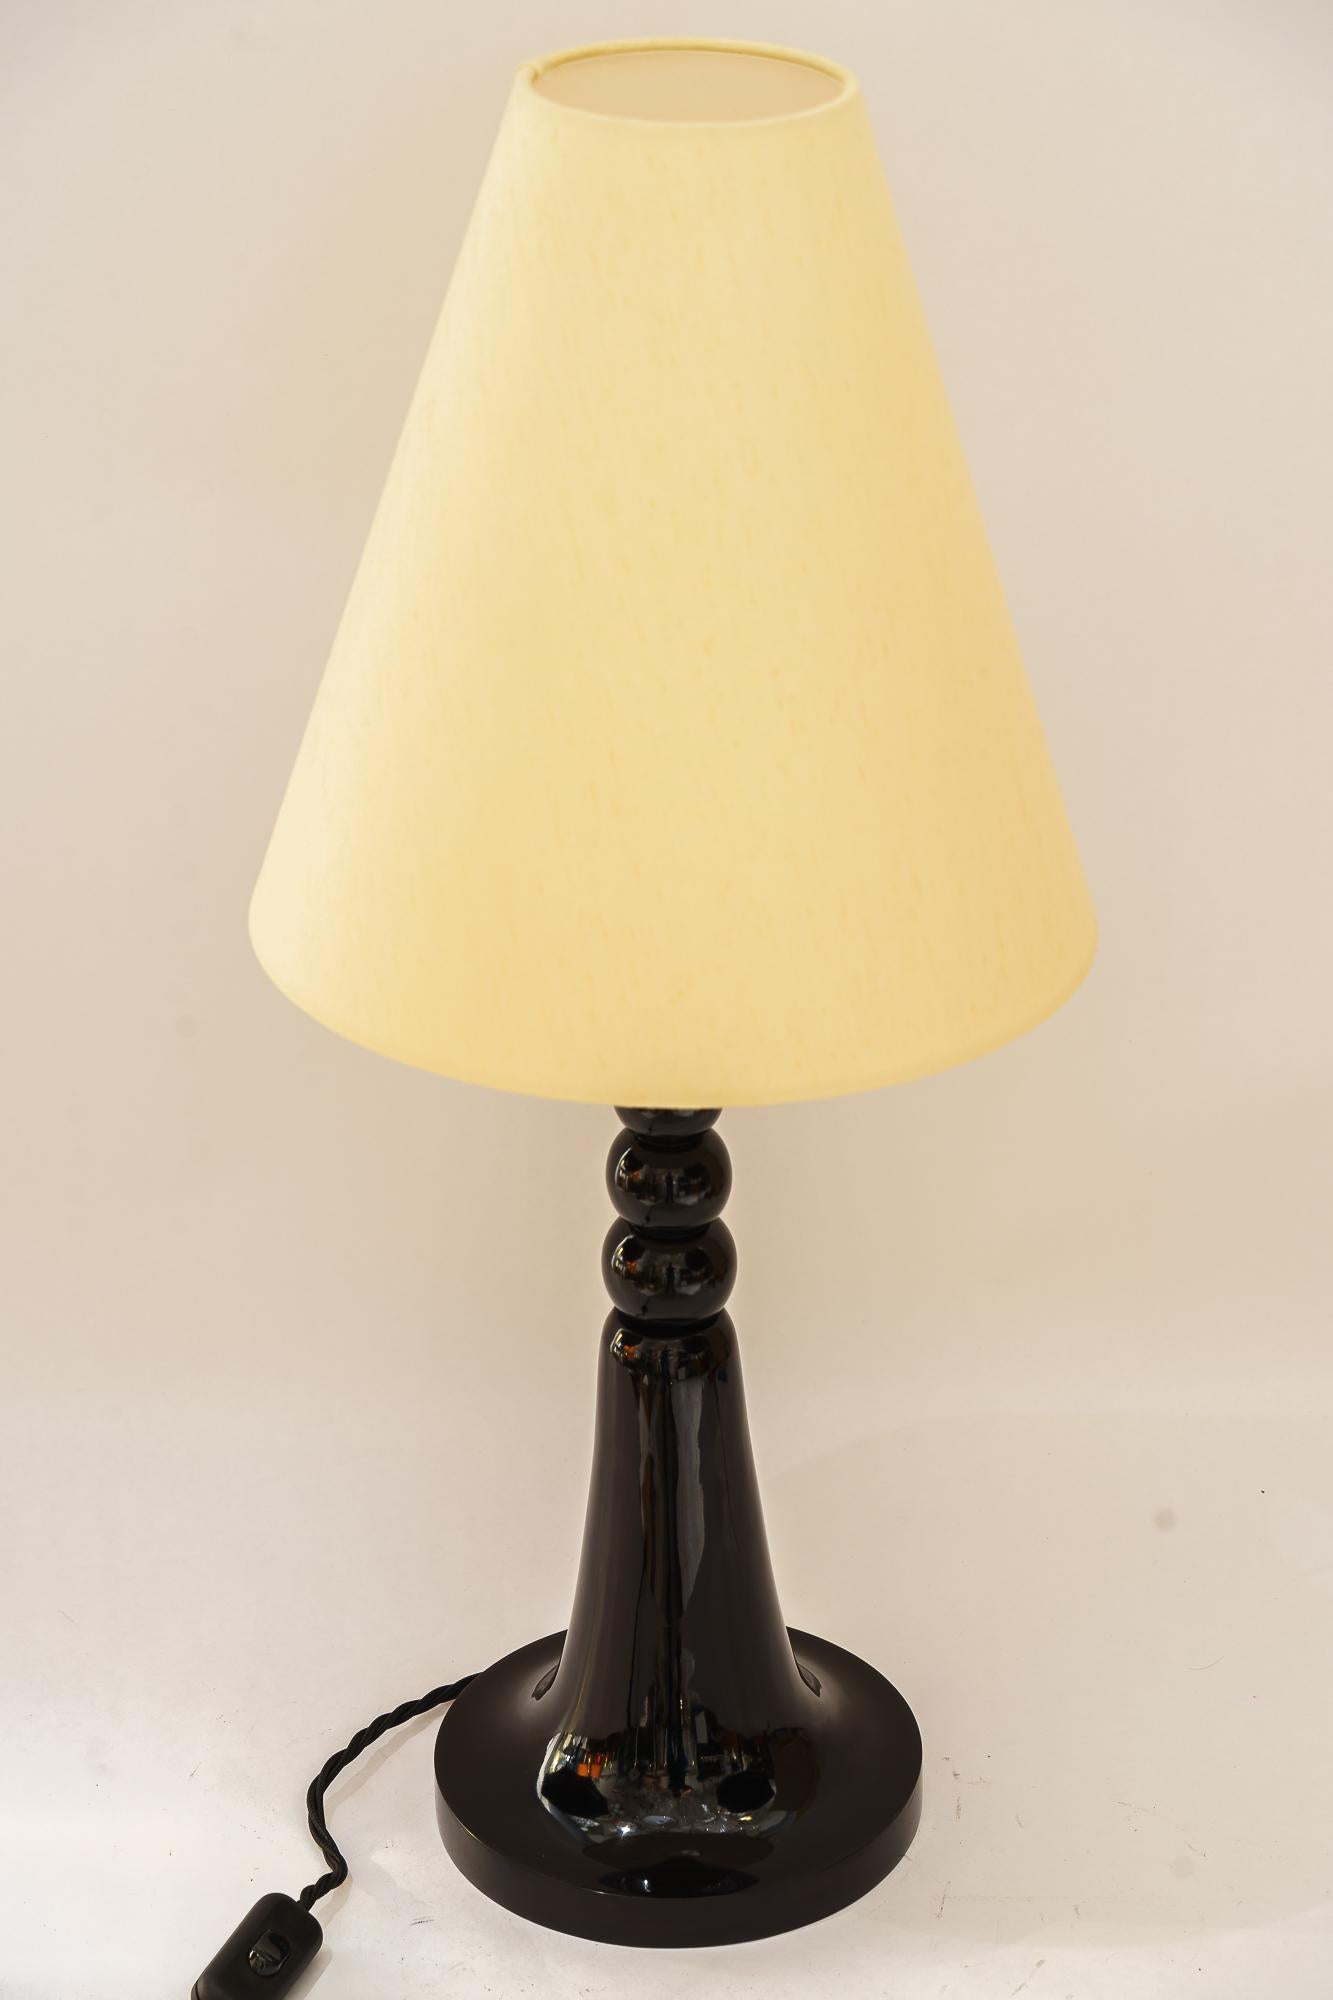 Art Deco wood table lamp vienna around 1930s with fabric shade
Beech wood blackened and polished
Partly chromed 